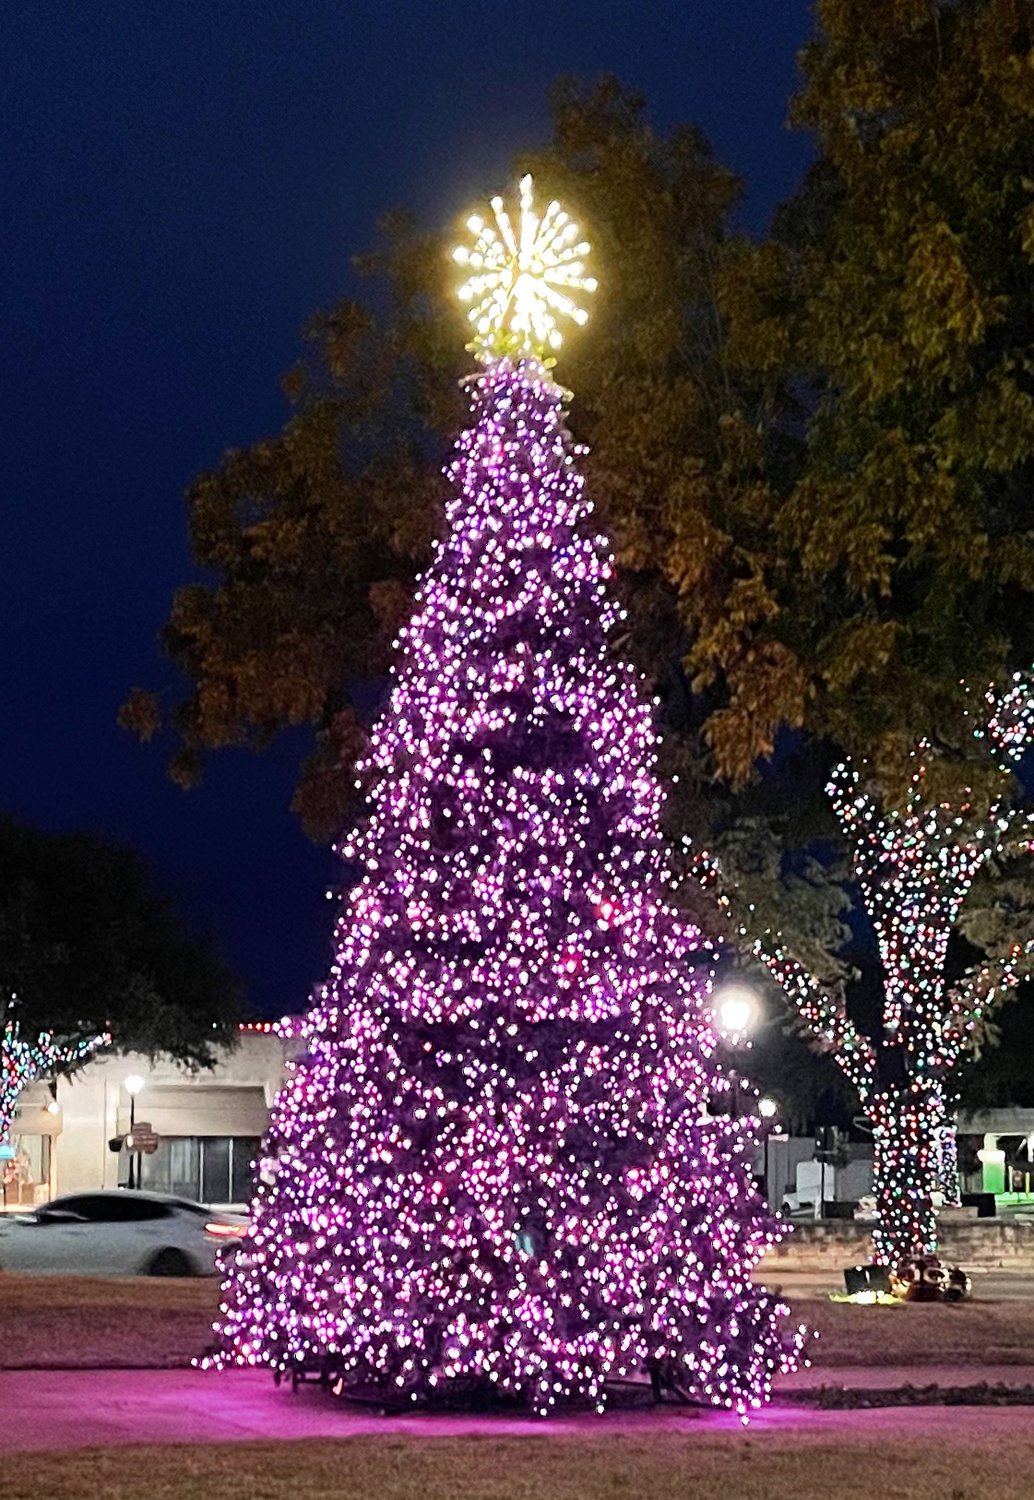 The Parker County Christmas Tree lights were turned pink to support the family of Athena Strand.